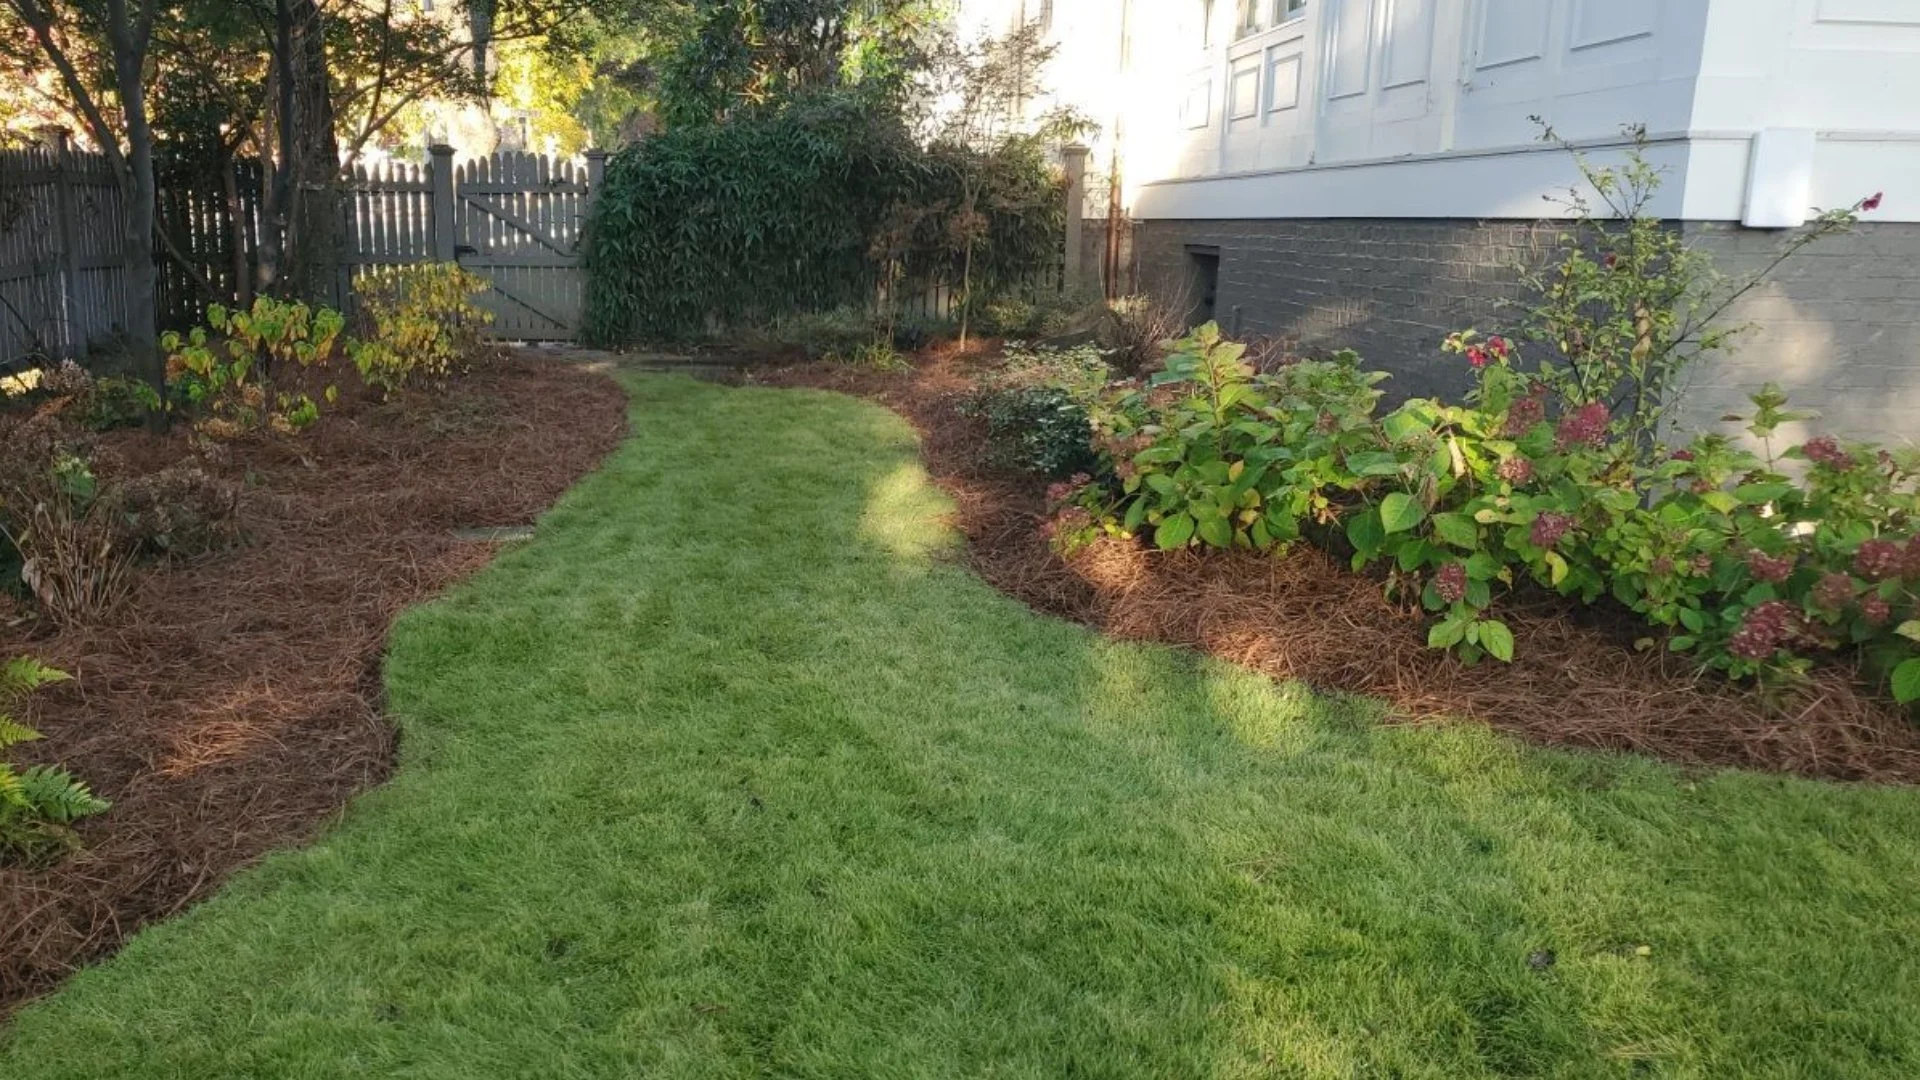 4 Things You Can Do To Upgrade Your Landscape Beds & Increase Curb Appeal